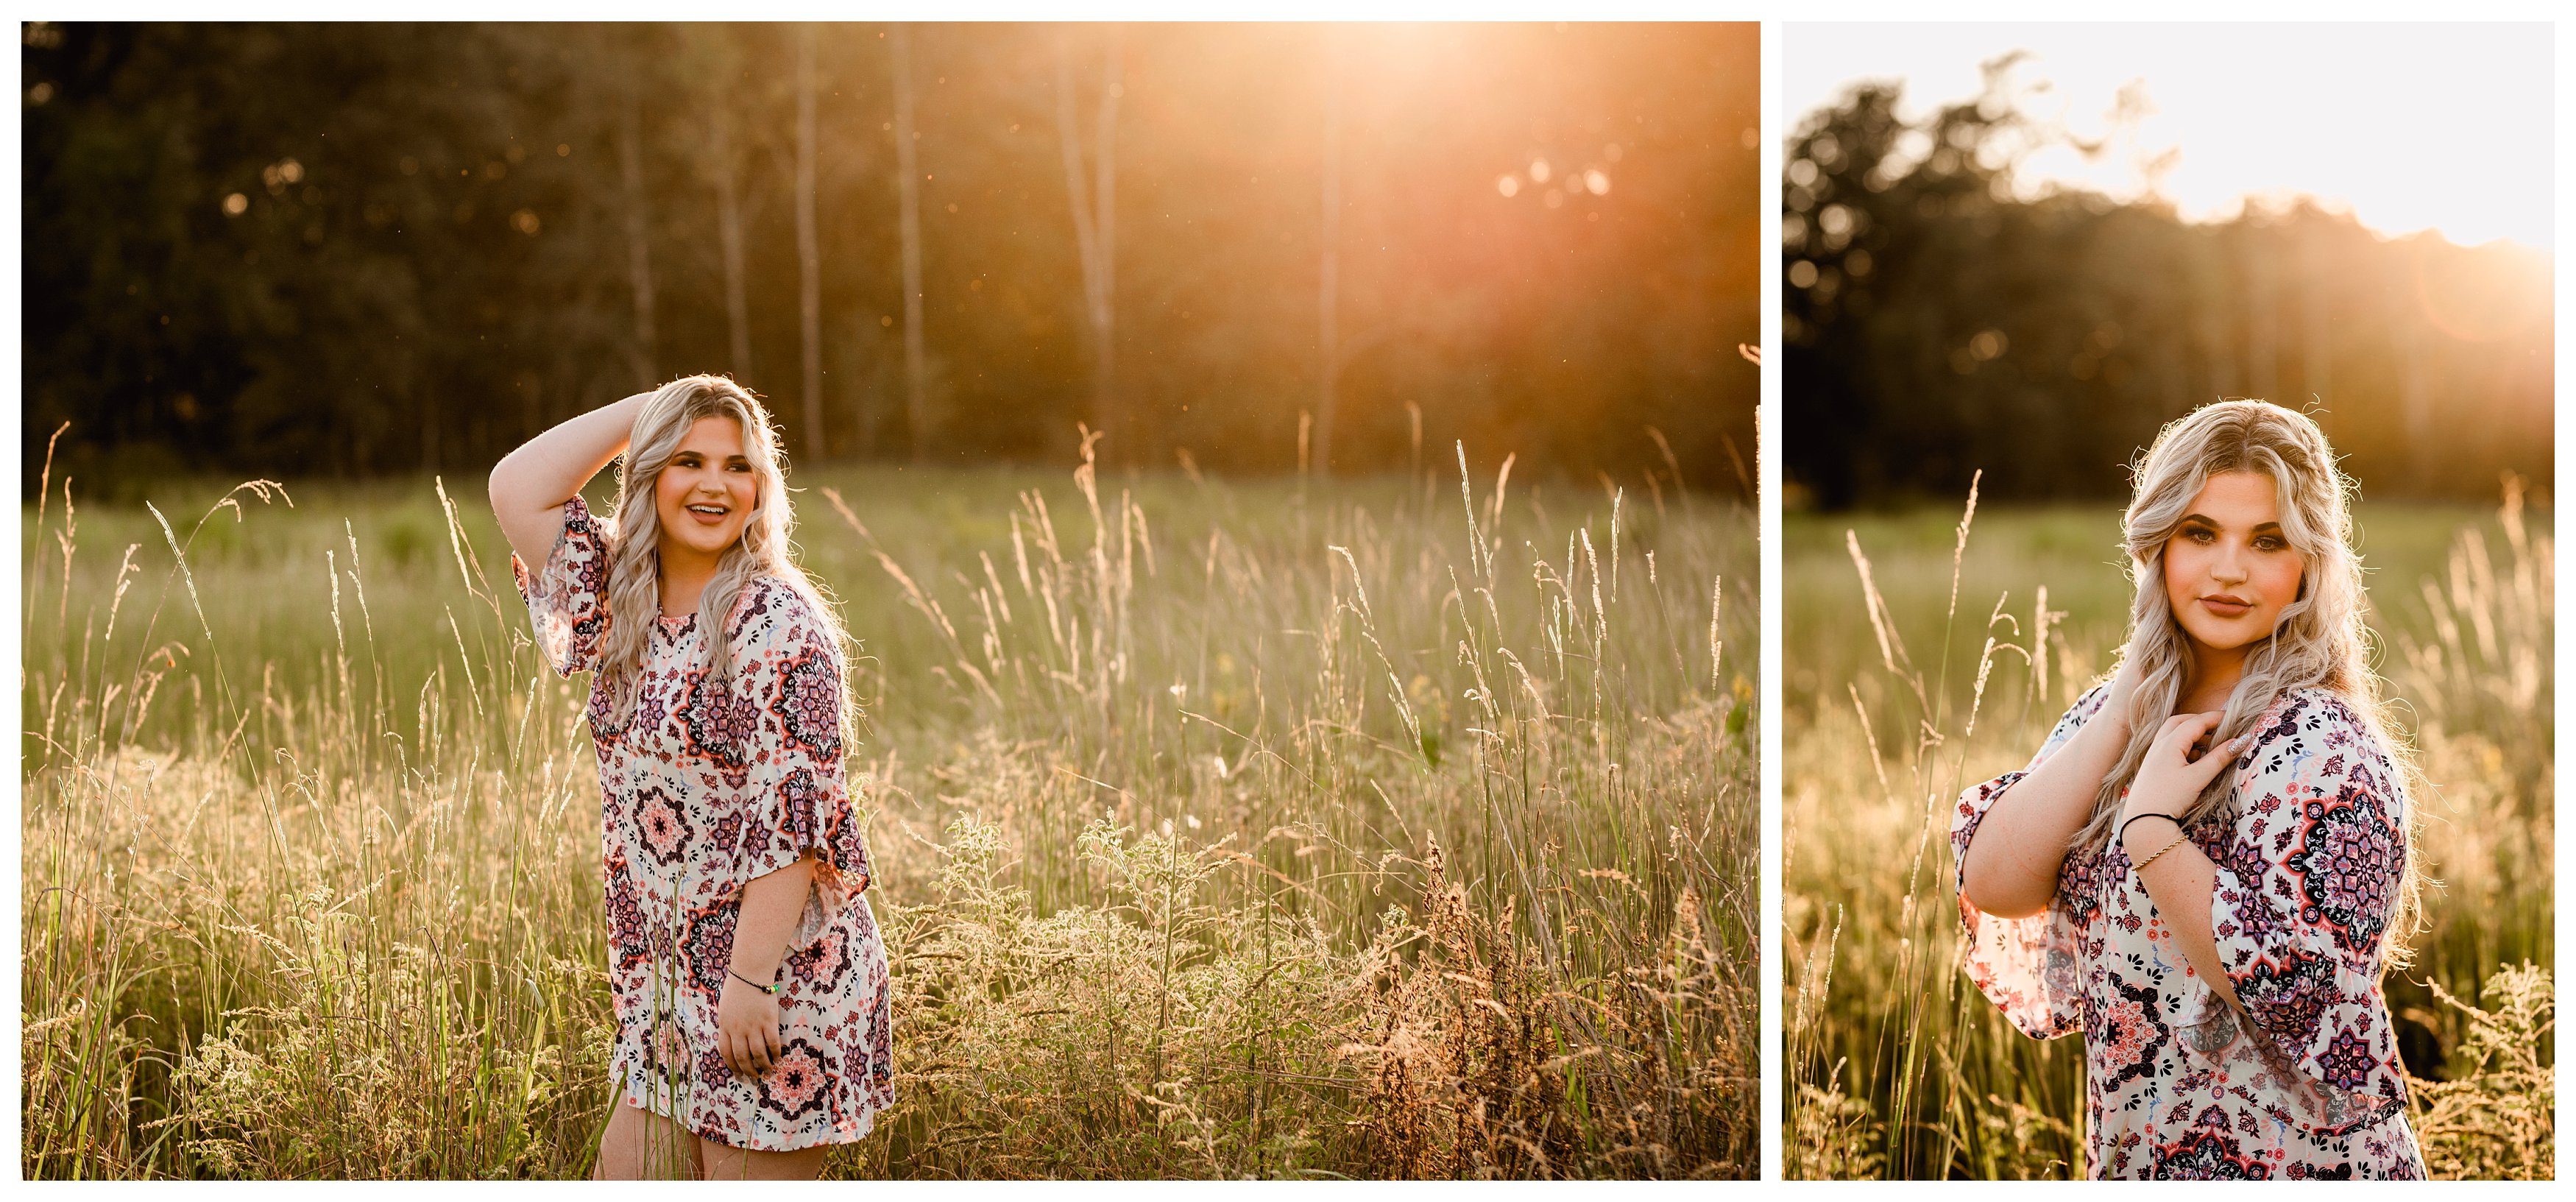 Beautiful sunset photos taken in an open field in Florida by pro senior photographer.